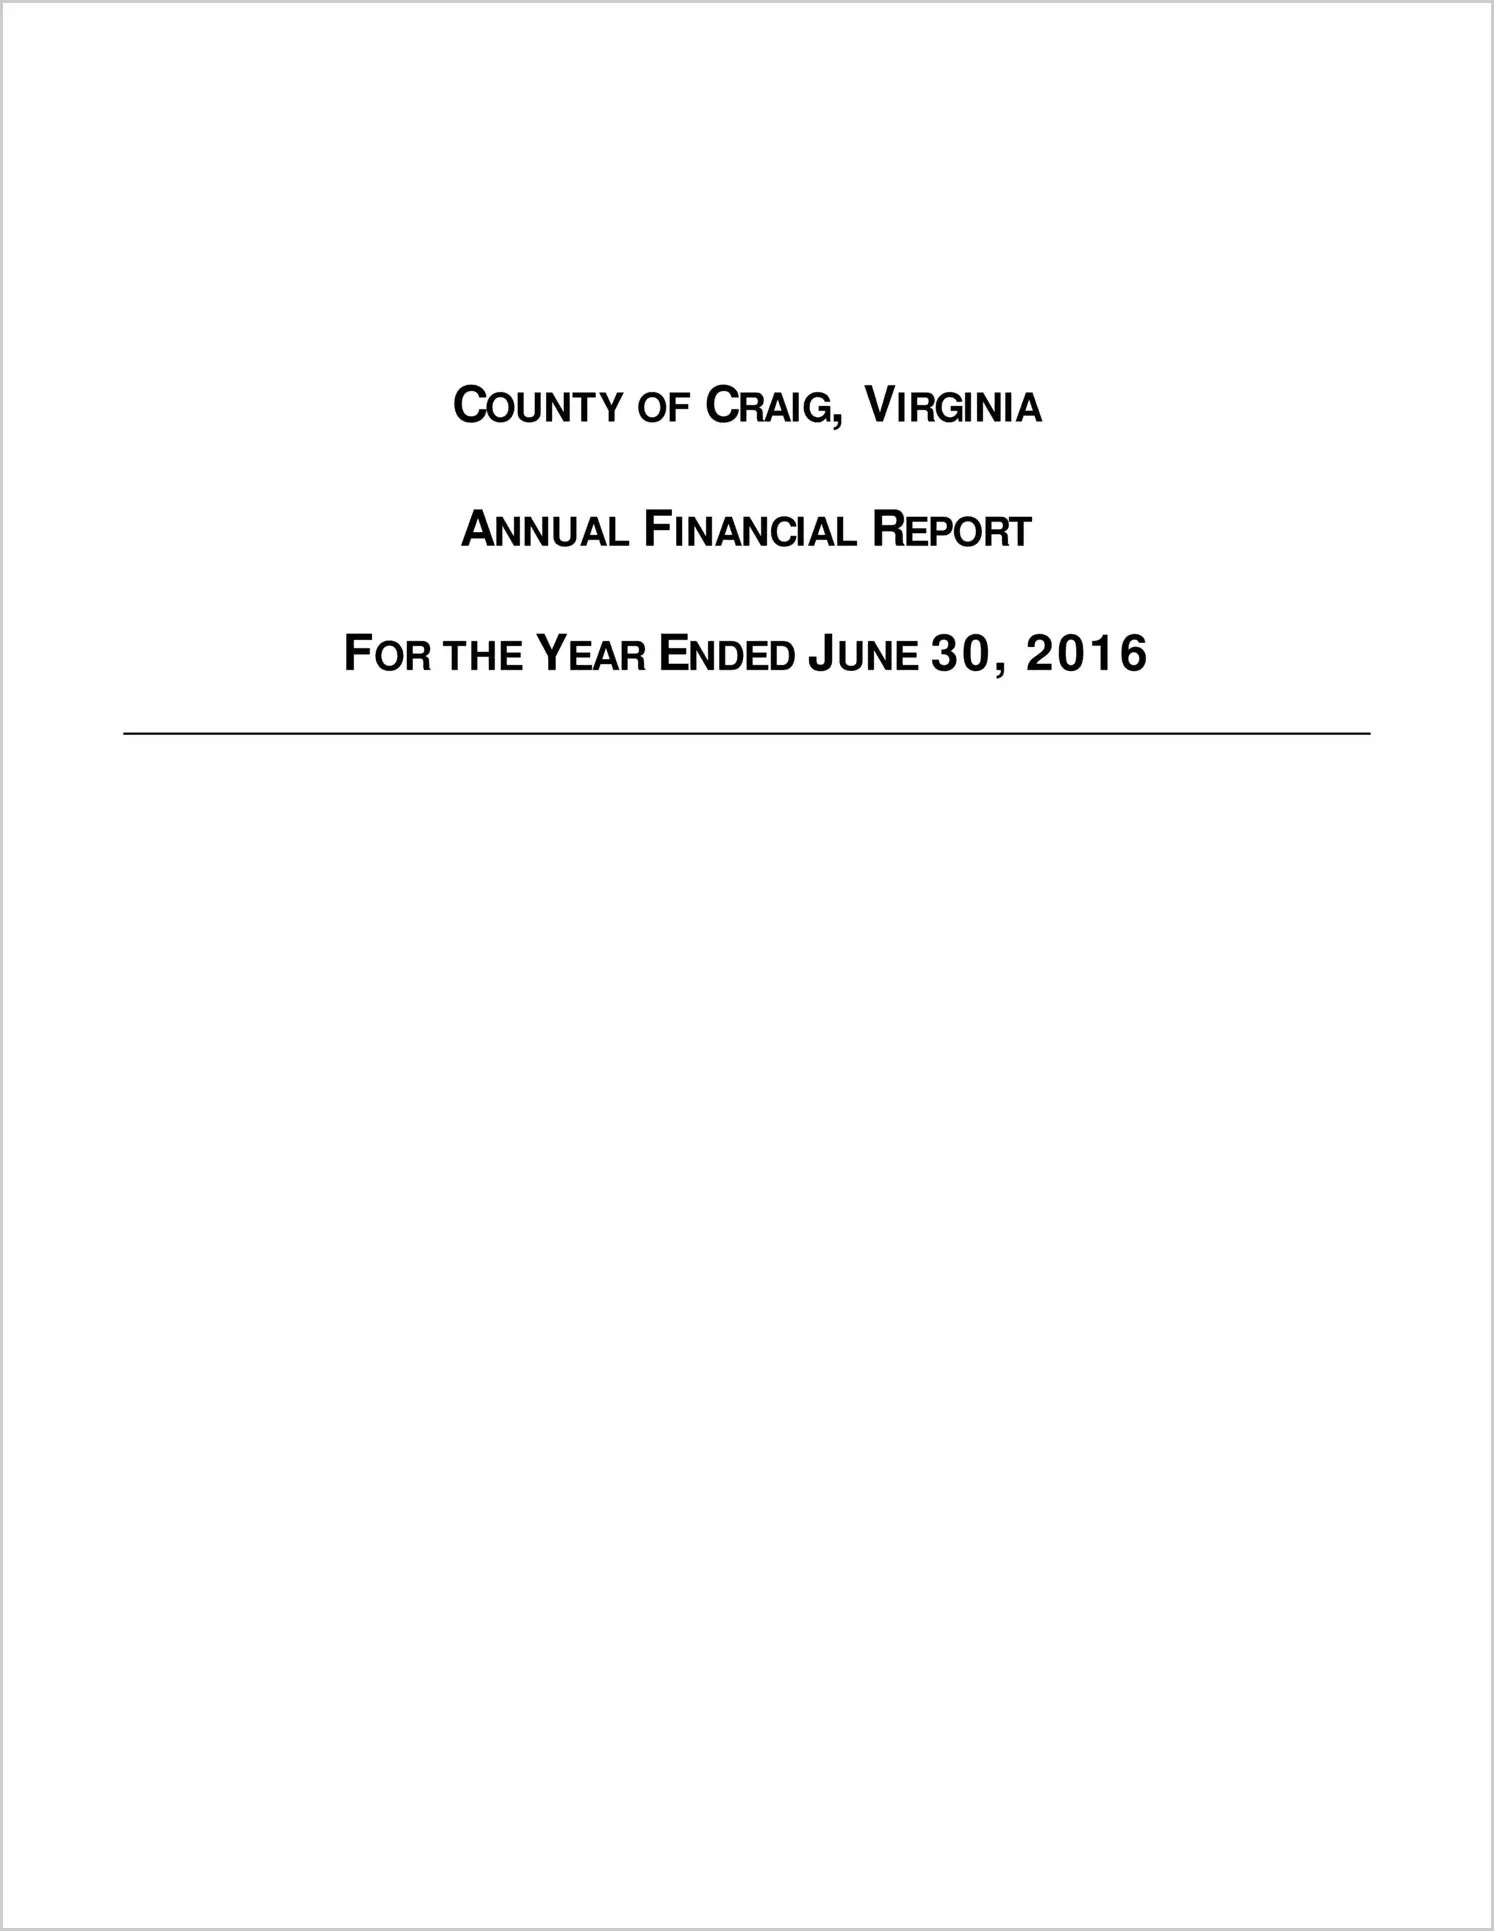 2016 Annual Financial Report for County of Craig